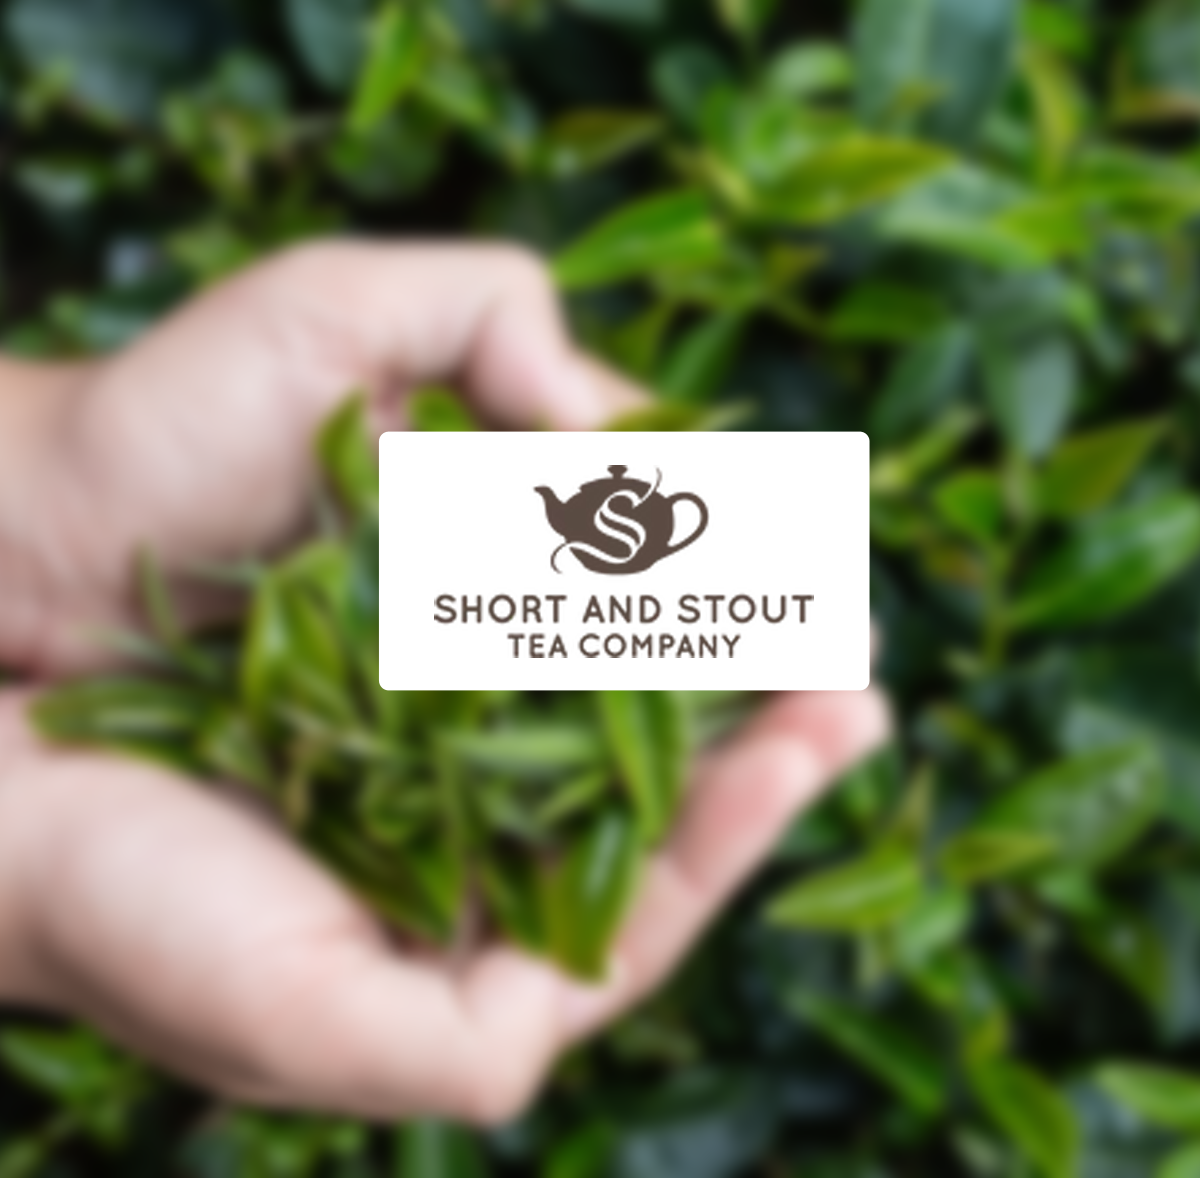 What’s Brewing at Short and Stout Tea in June